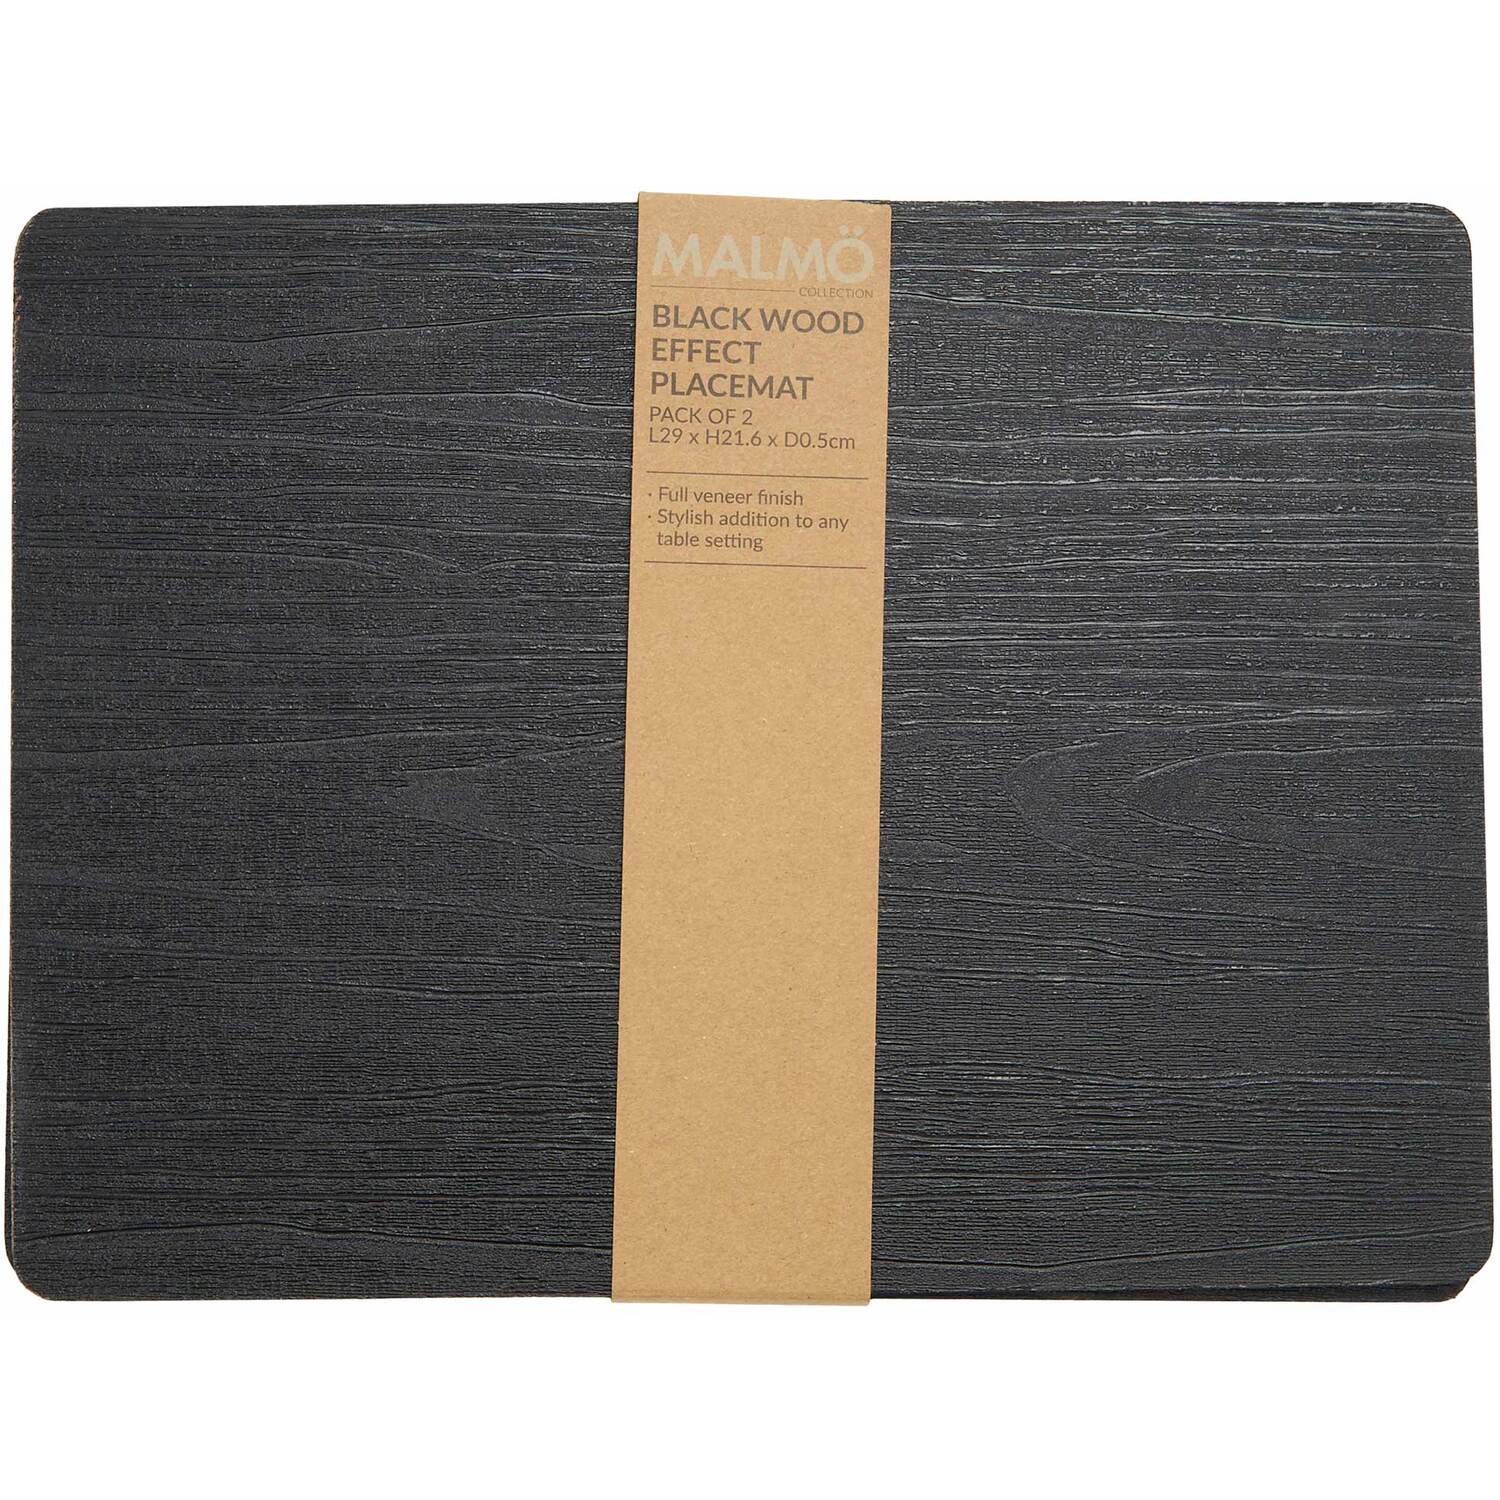 Pack of 2 Malmo Wood Effect Placemats - Black Image 4